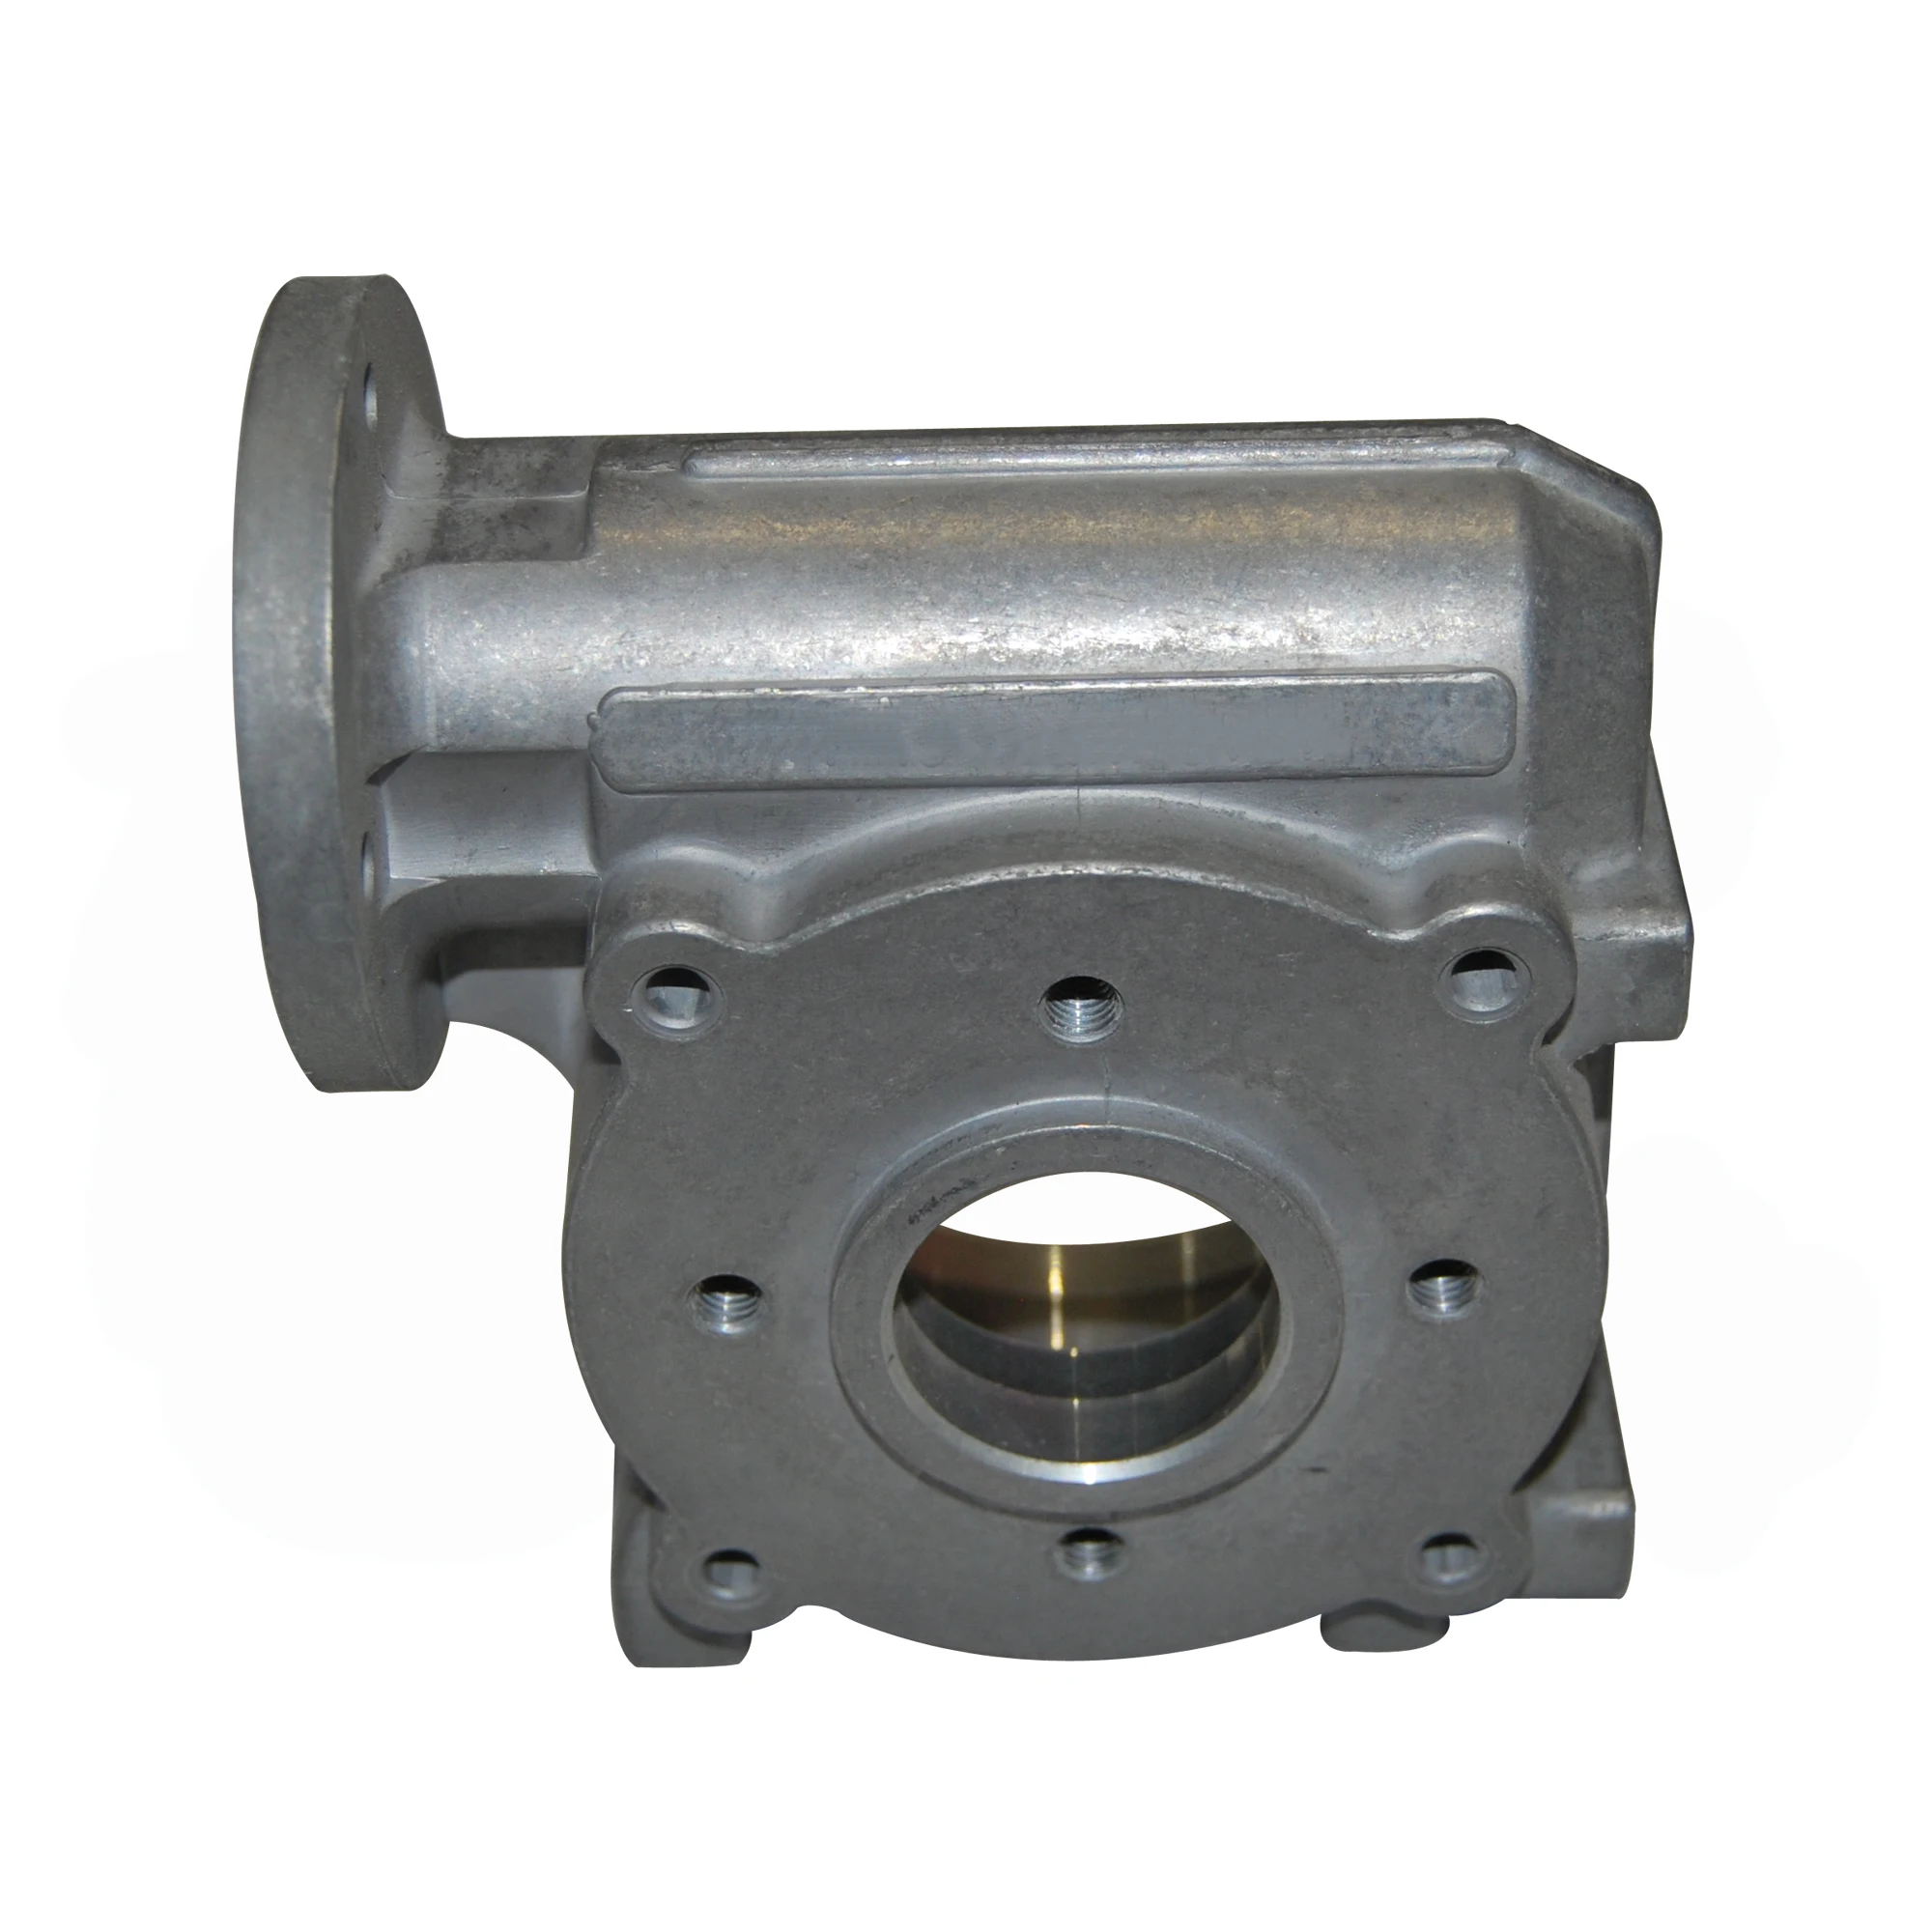 MATECH Customized Low Pressure Casting Water Pump Parts(图17)